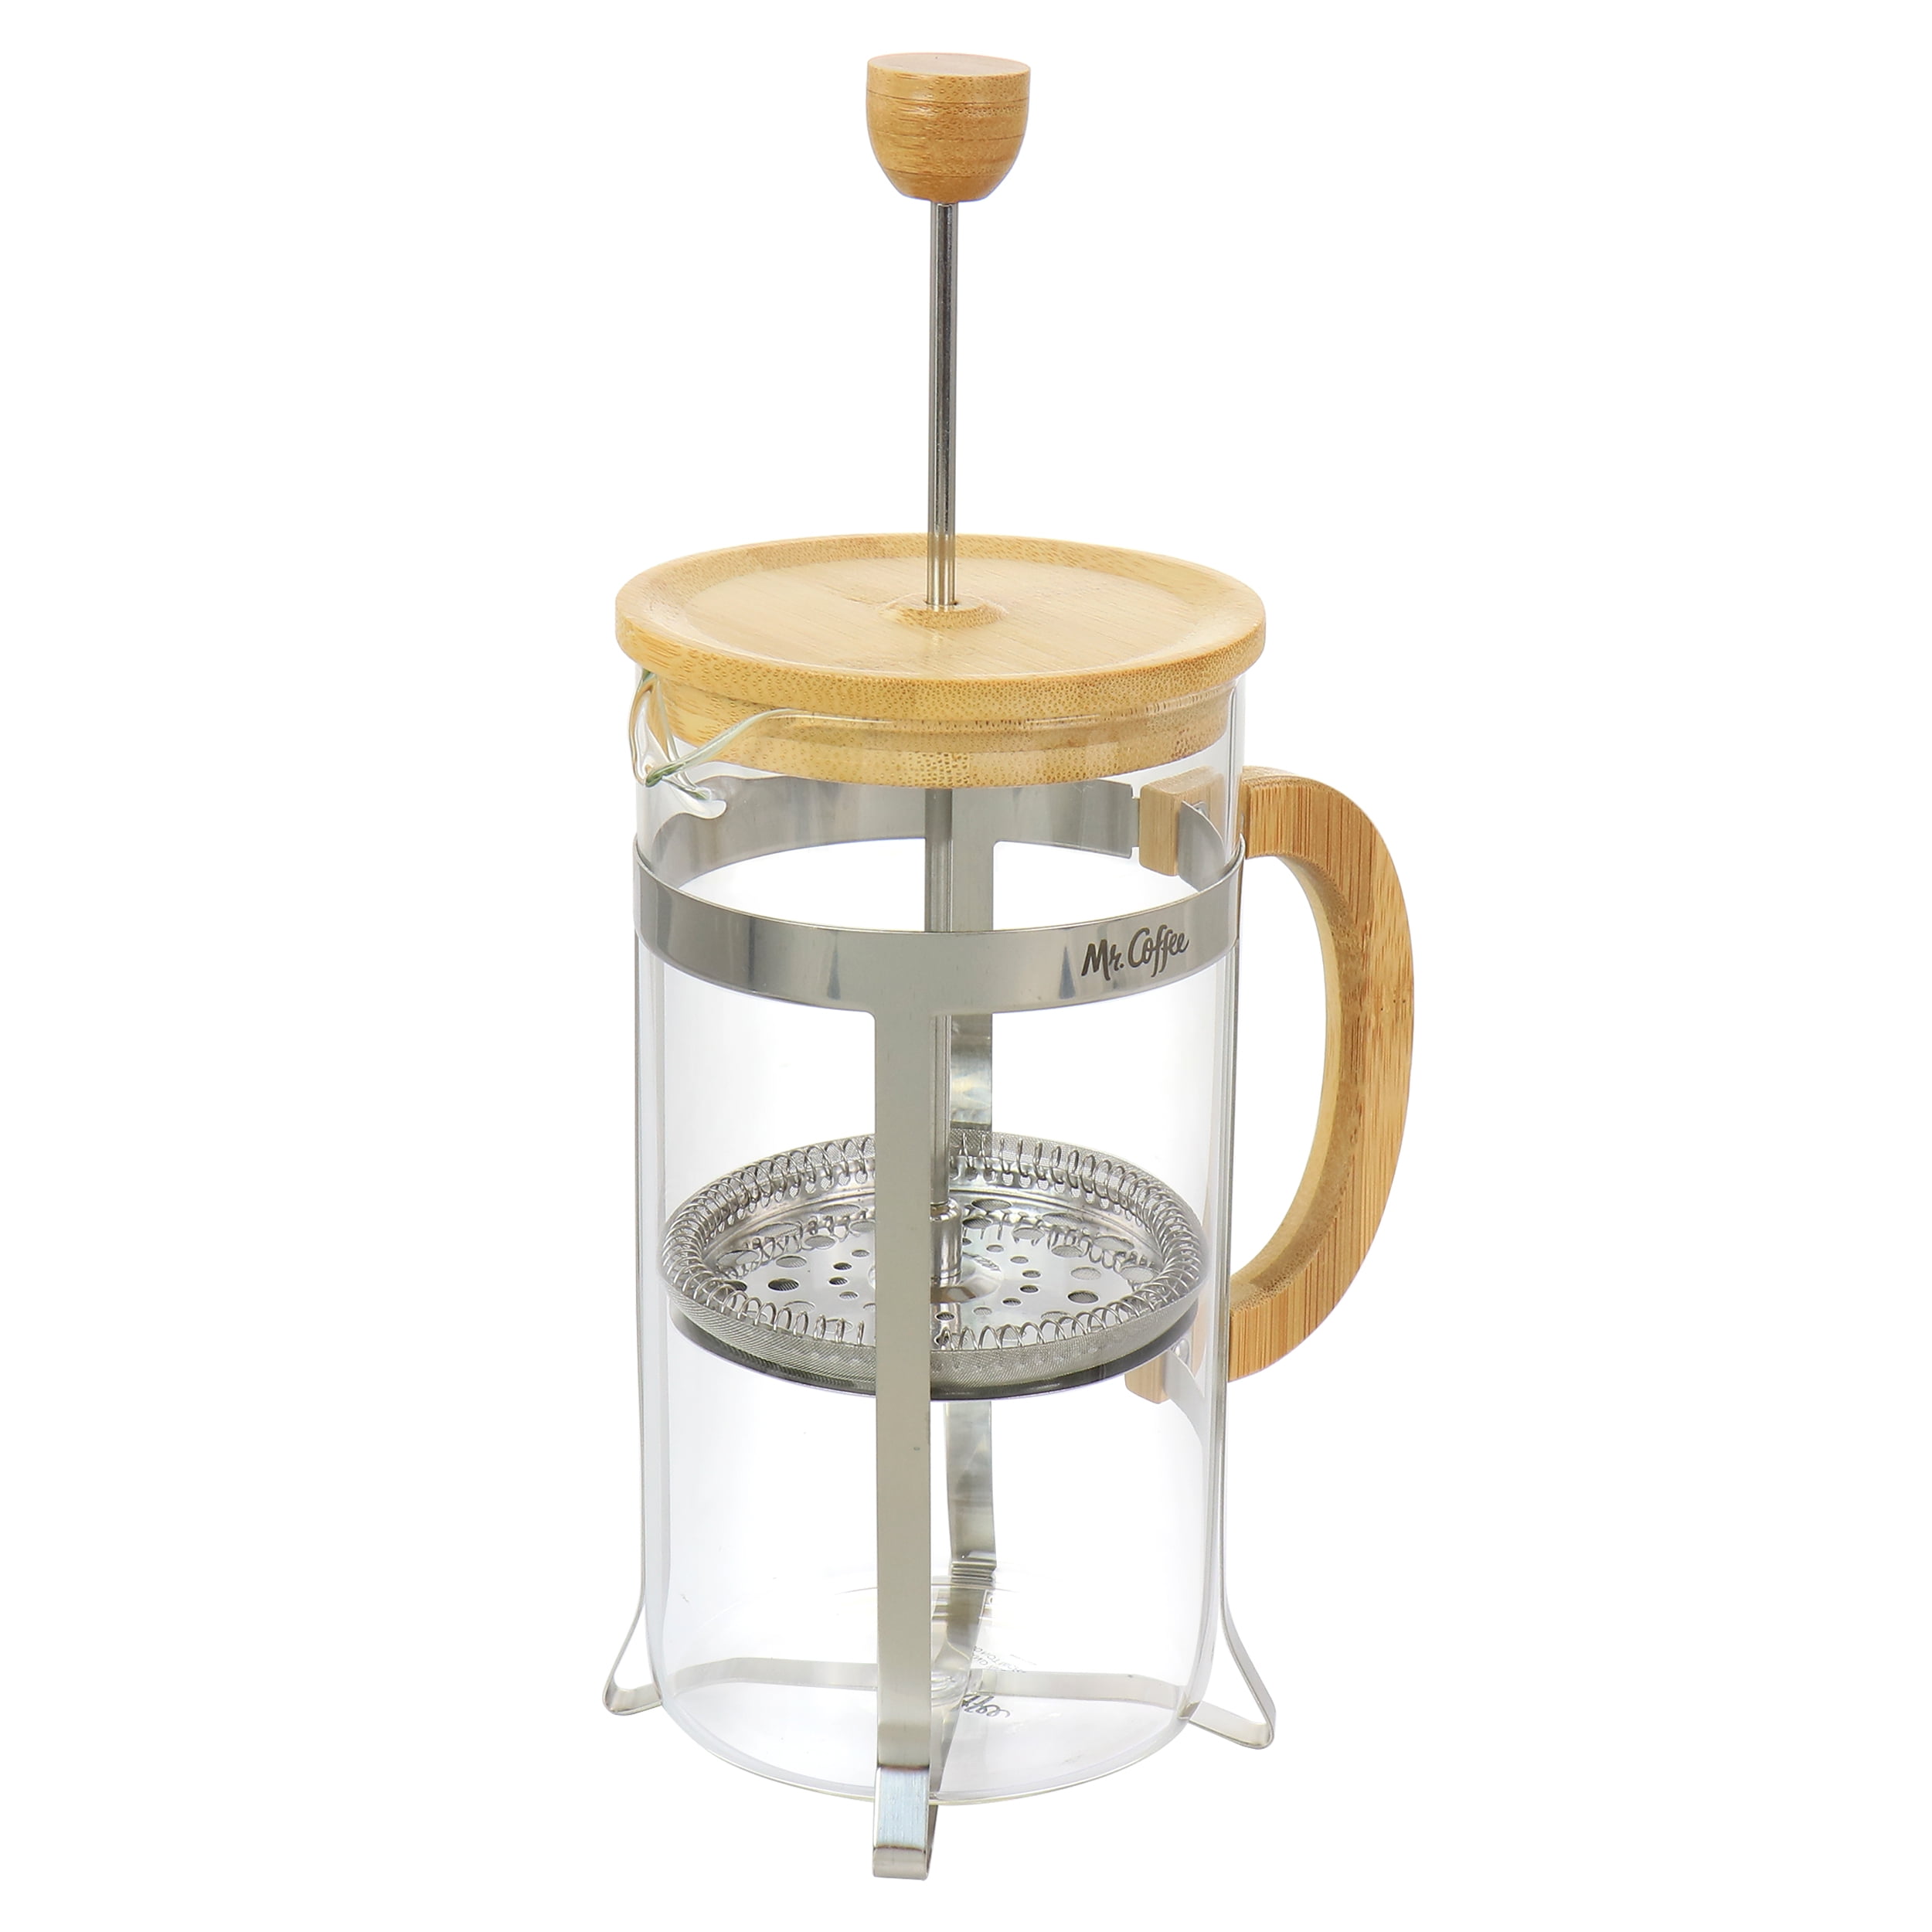 Mr. Coffee 32 Ounce Cafe Oasis Quart Glass Body French Press Coffee Maker